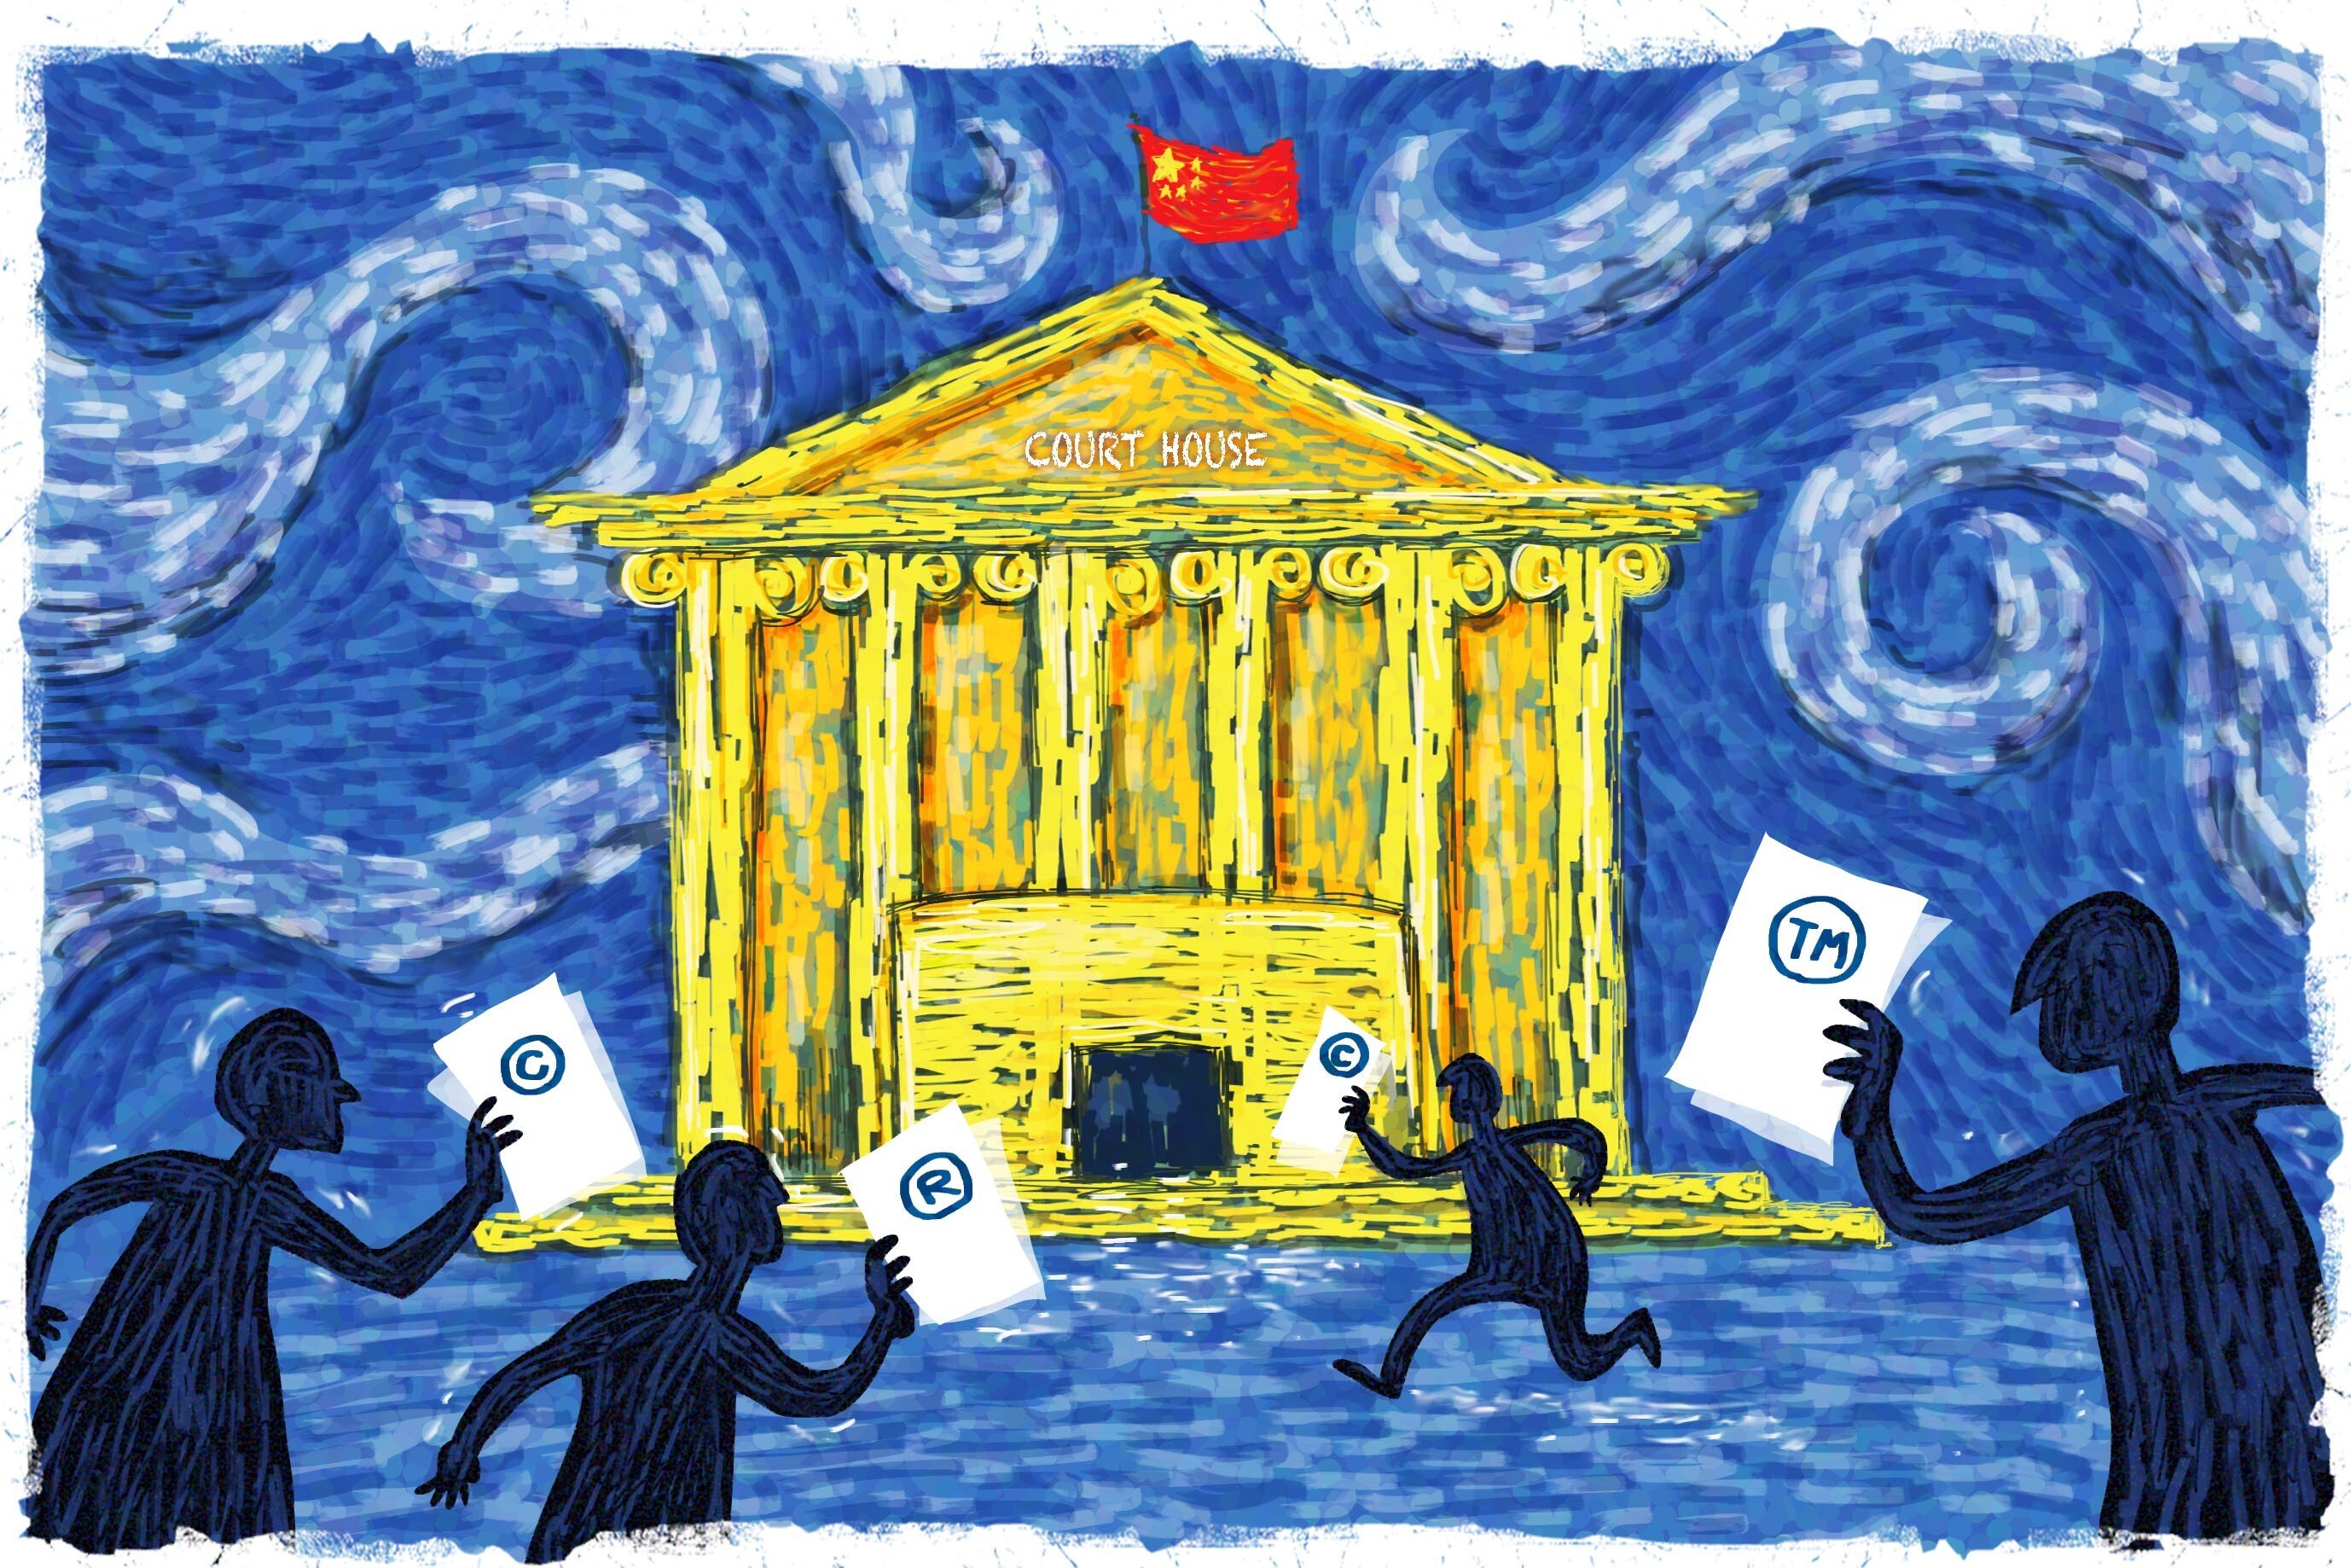 More foreign and local companies are filing for trademarks in local intellectual-property courts as industry reforms earn China brownie points from lawyers and foreign agencies. Illustration: Henry Wong